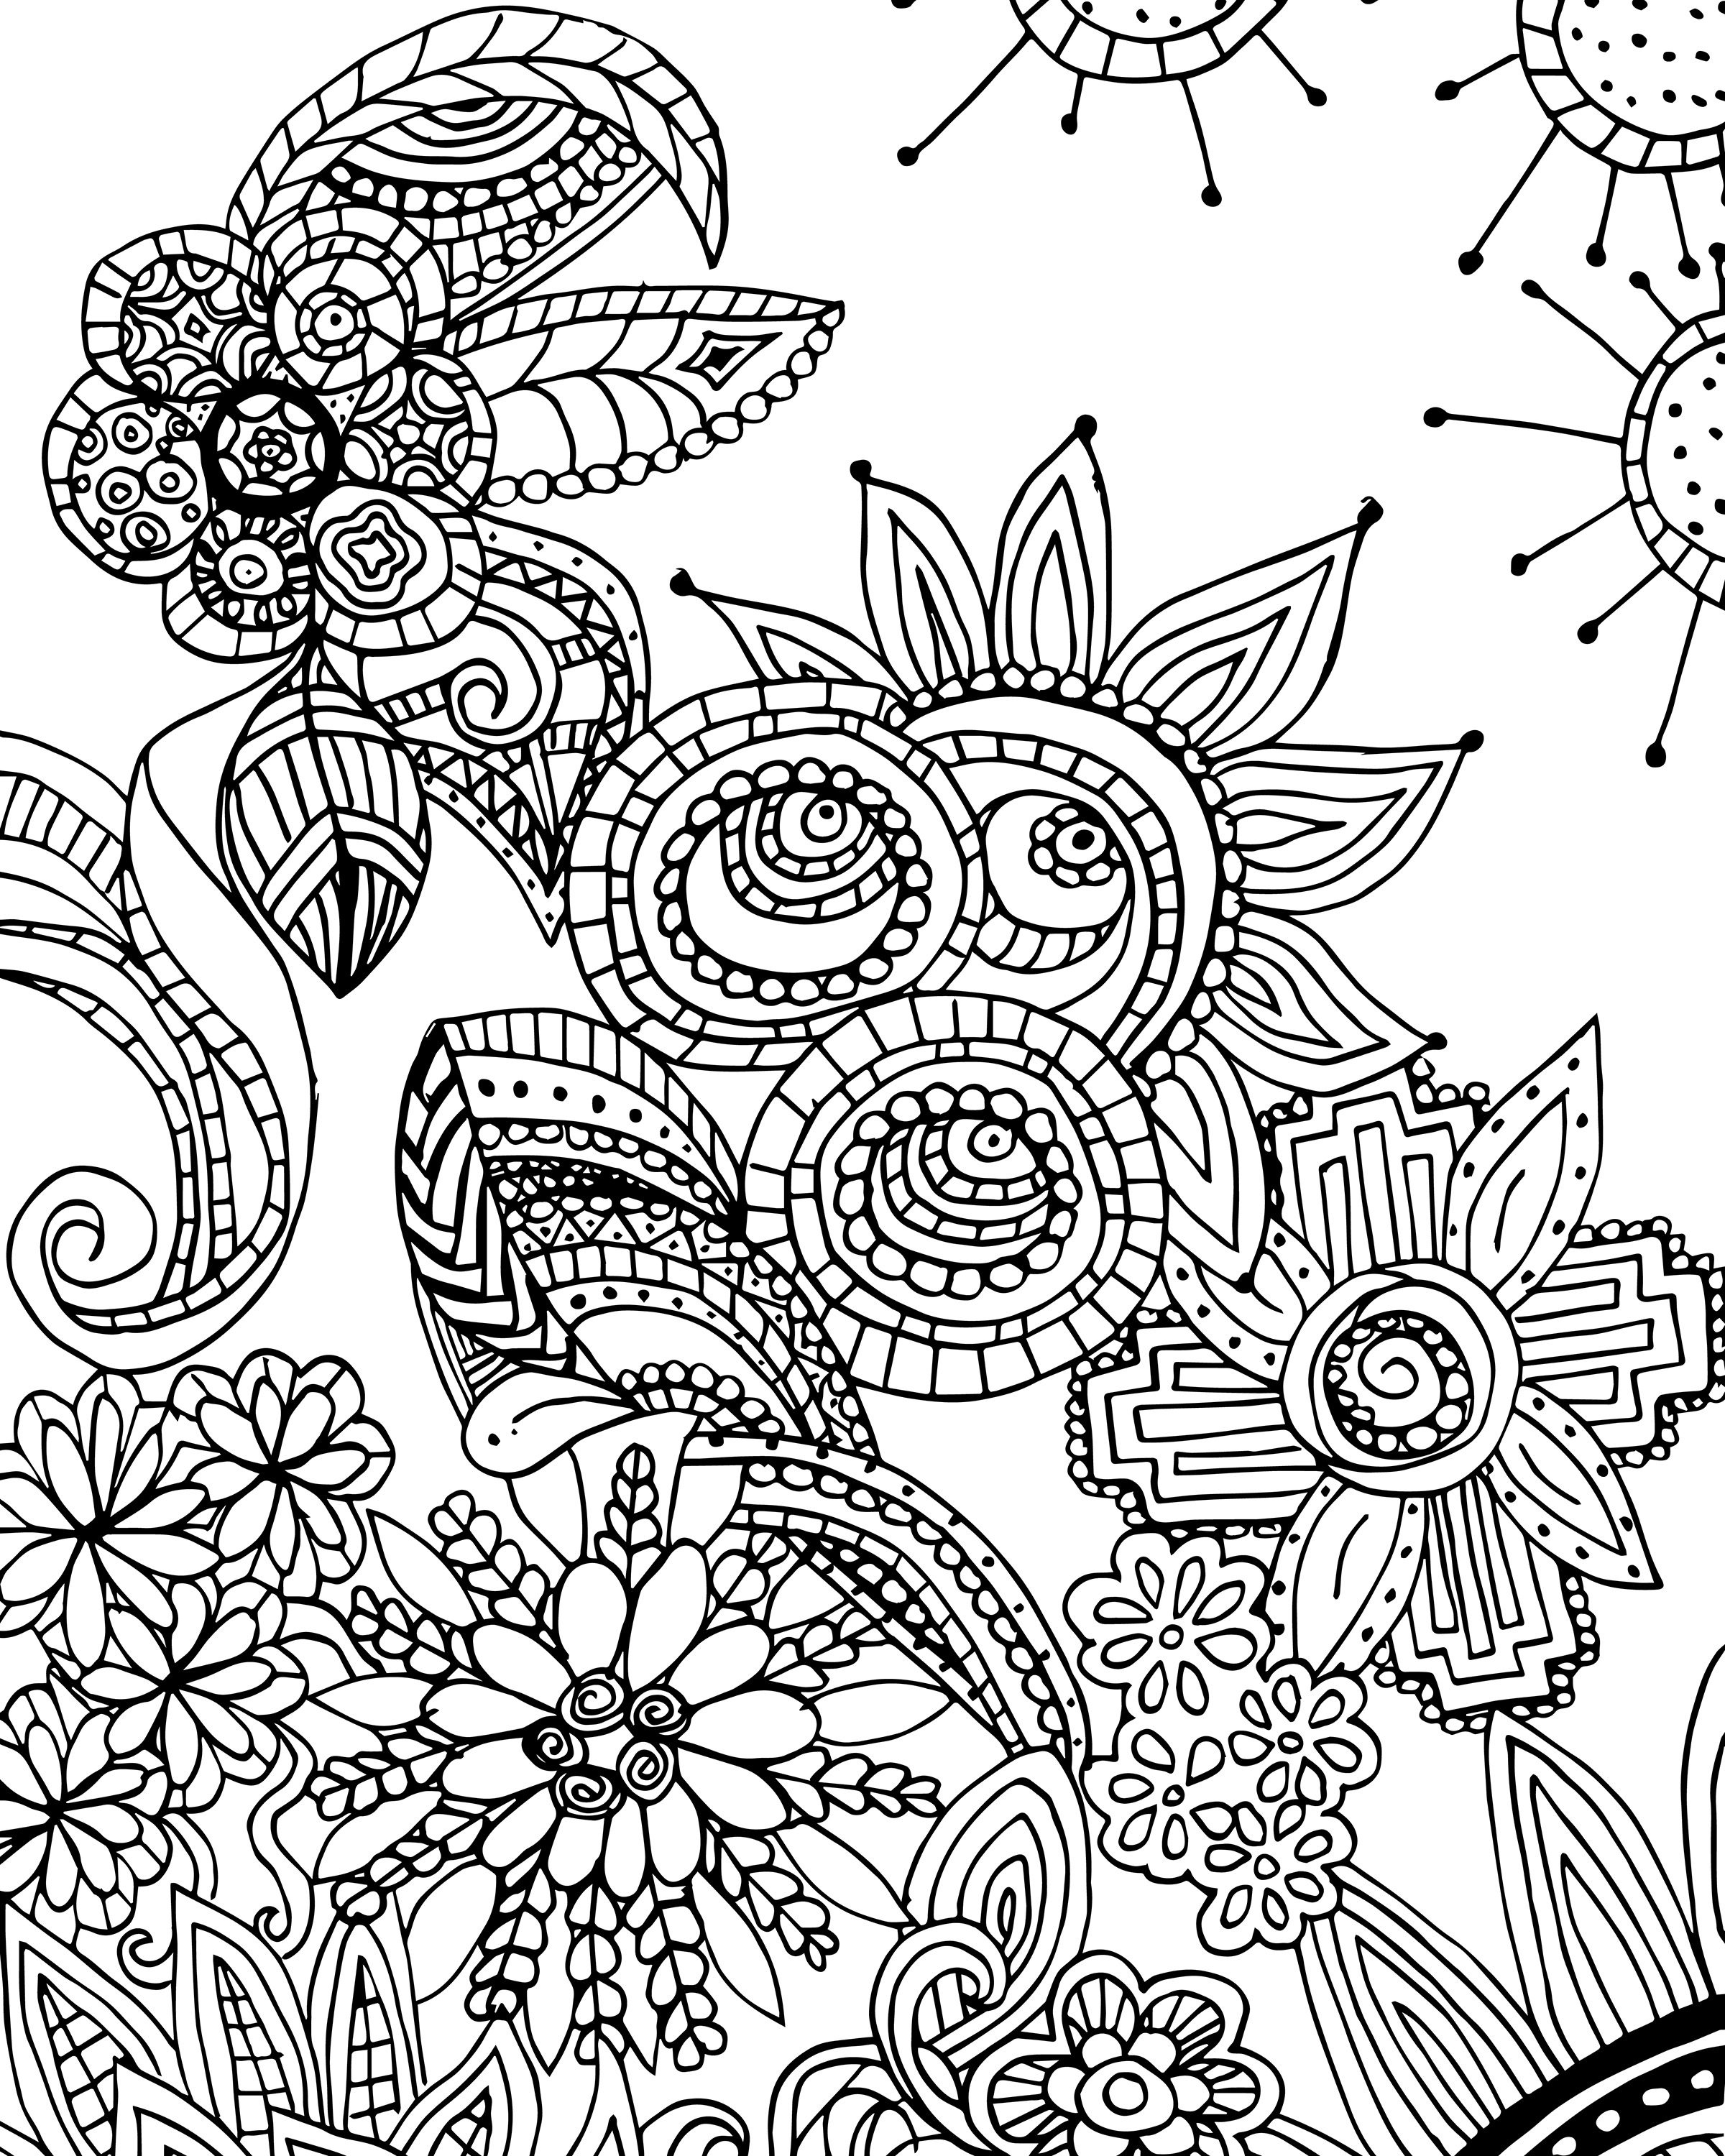 Free Printable Zen Coloring Pages | Free Printable A to Z